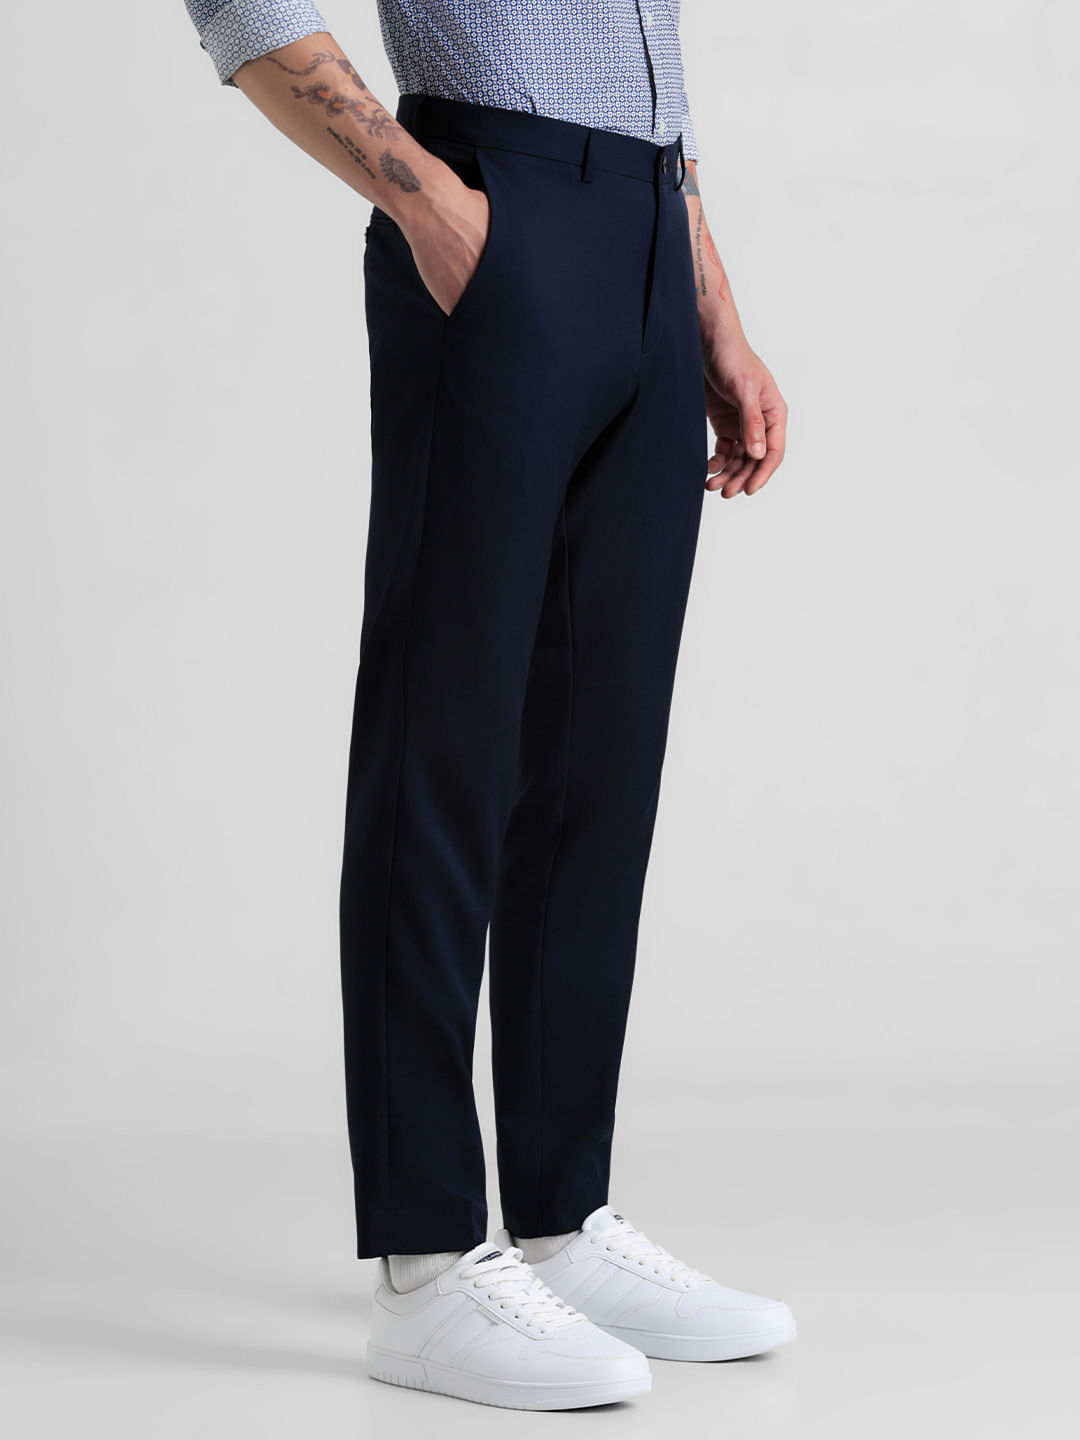 Buy Navy Blue Trousers & Mens High Waisted Trousers - Apella